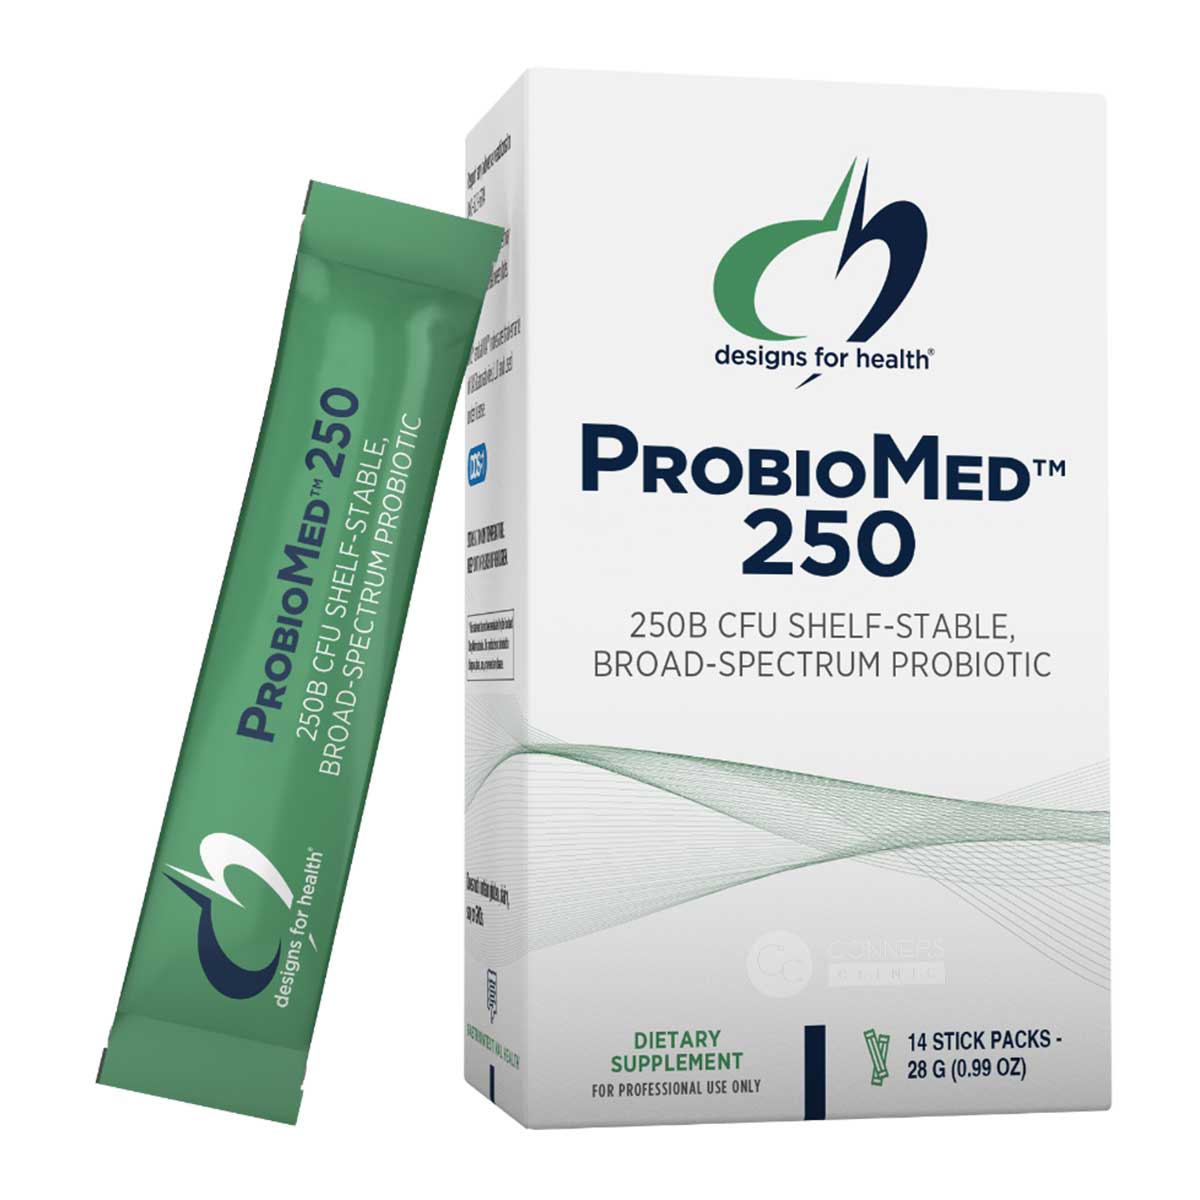 ProbioMed 250 Designs for Health Supplement - Conners Clinic